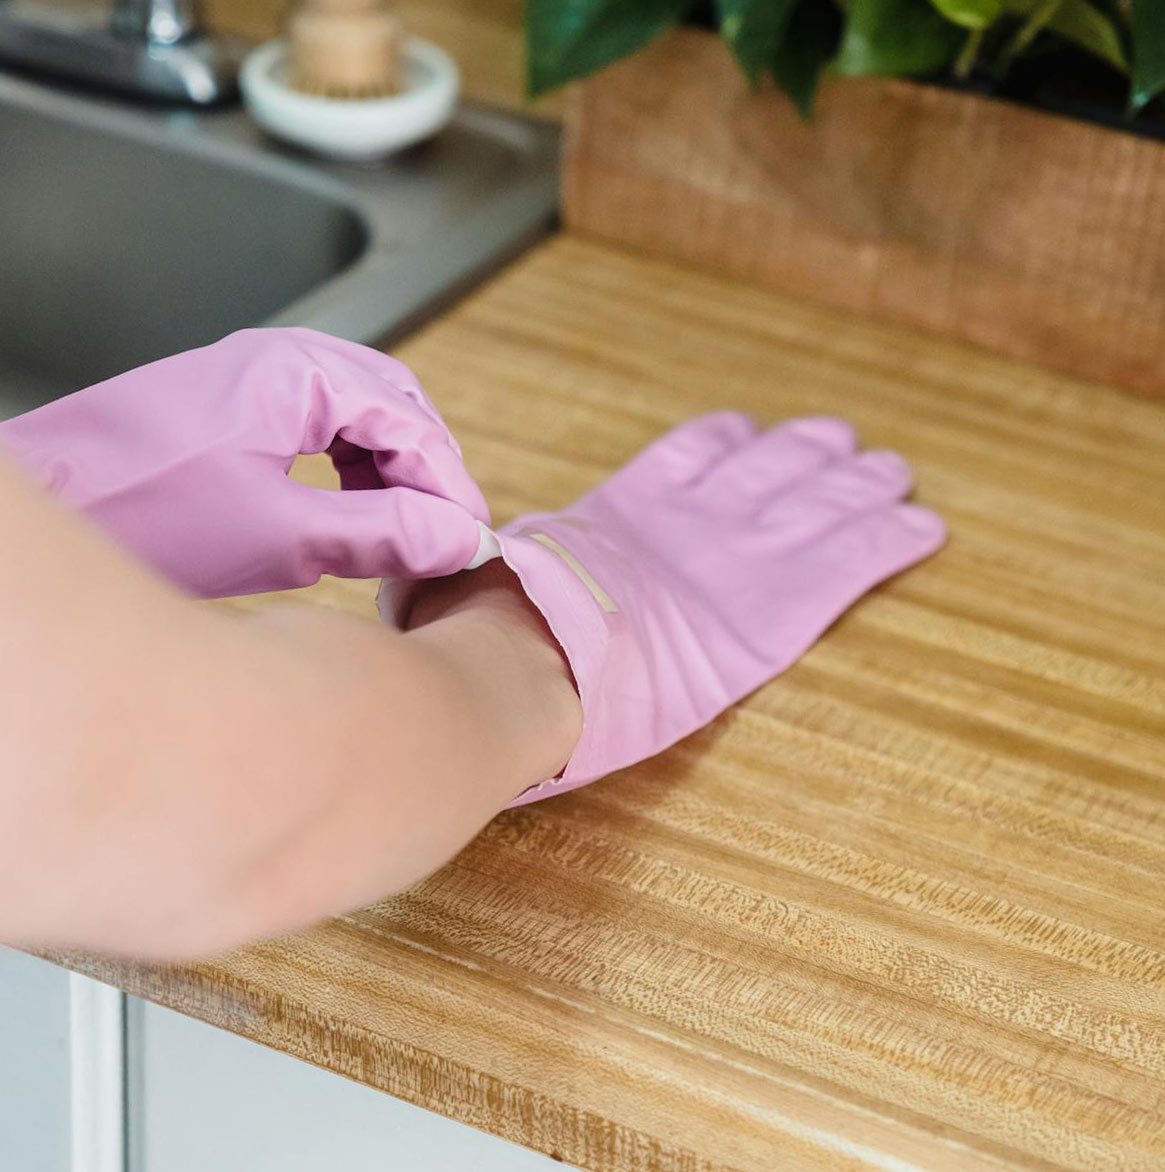 Hands with pink rubber gloves preparing to clean light wood laminate countertop